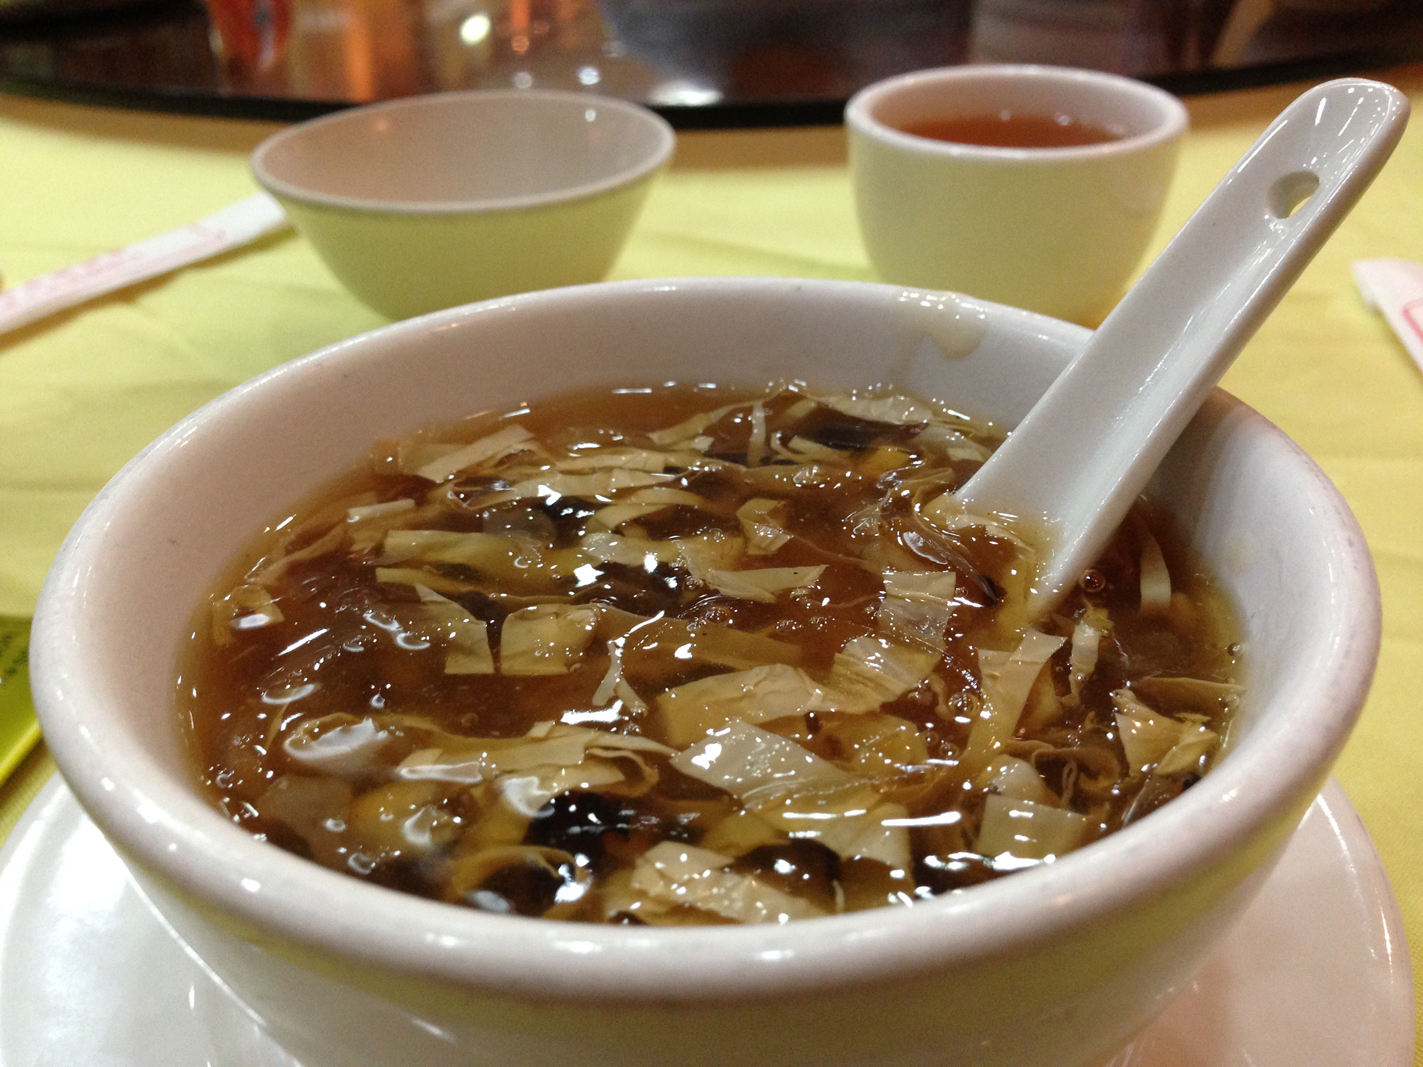 This was a vegetarian soup that kind of reminded me of shark fin soup. It was really good!